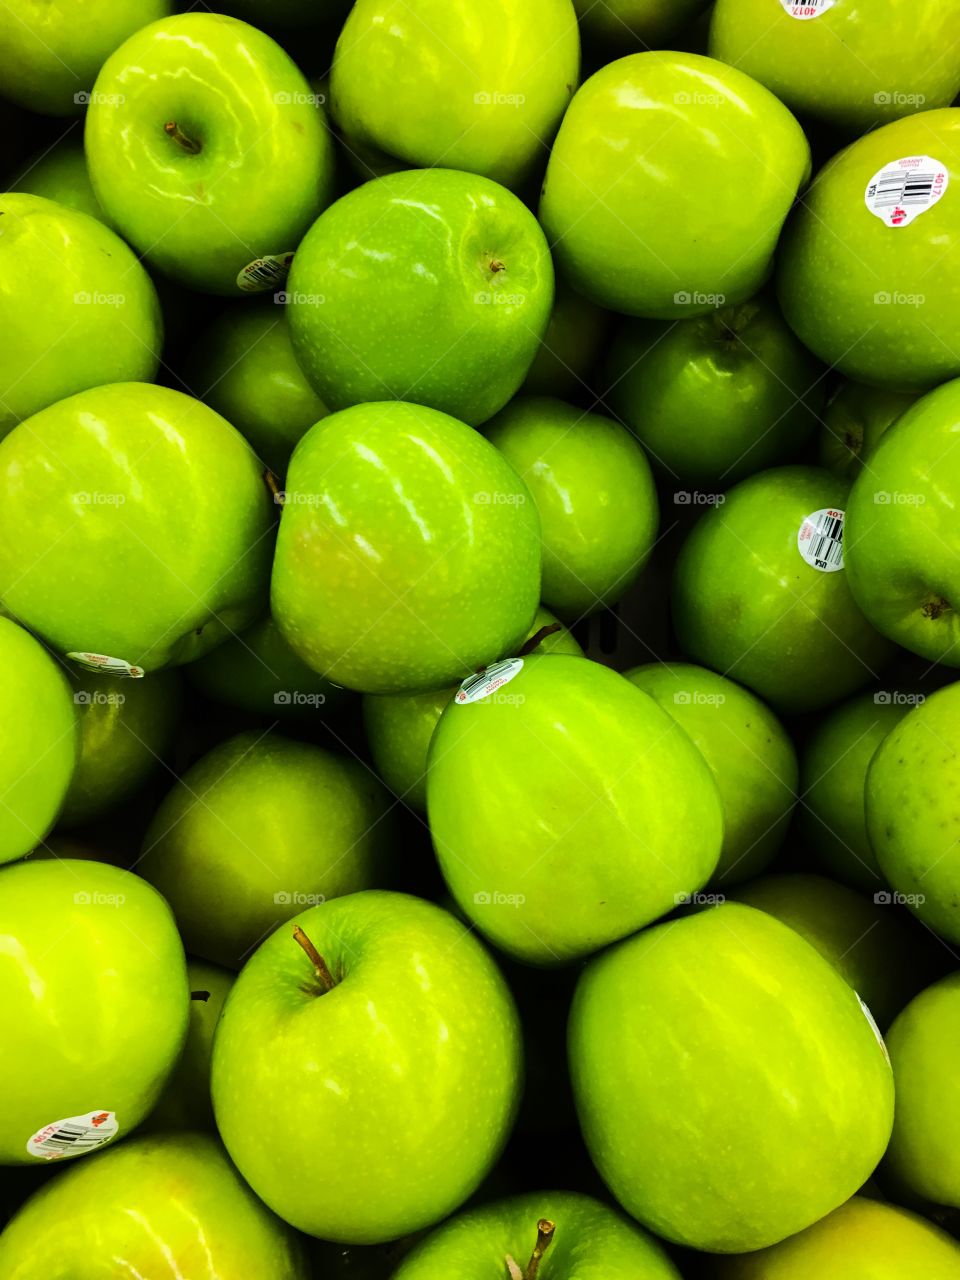 Green Granny Smith apples in the produce section 